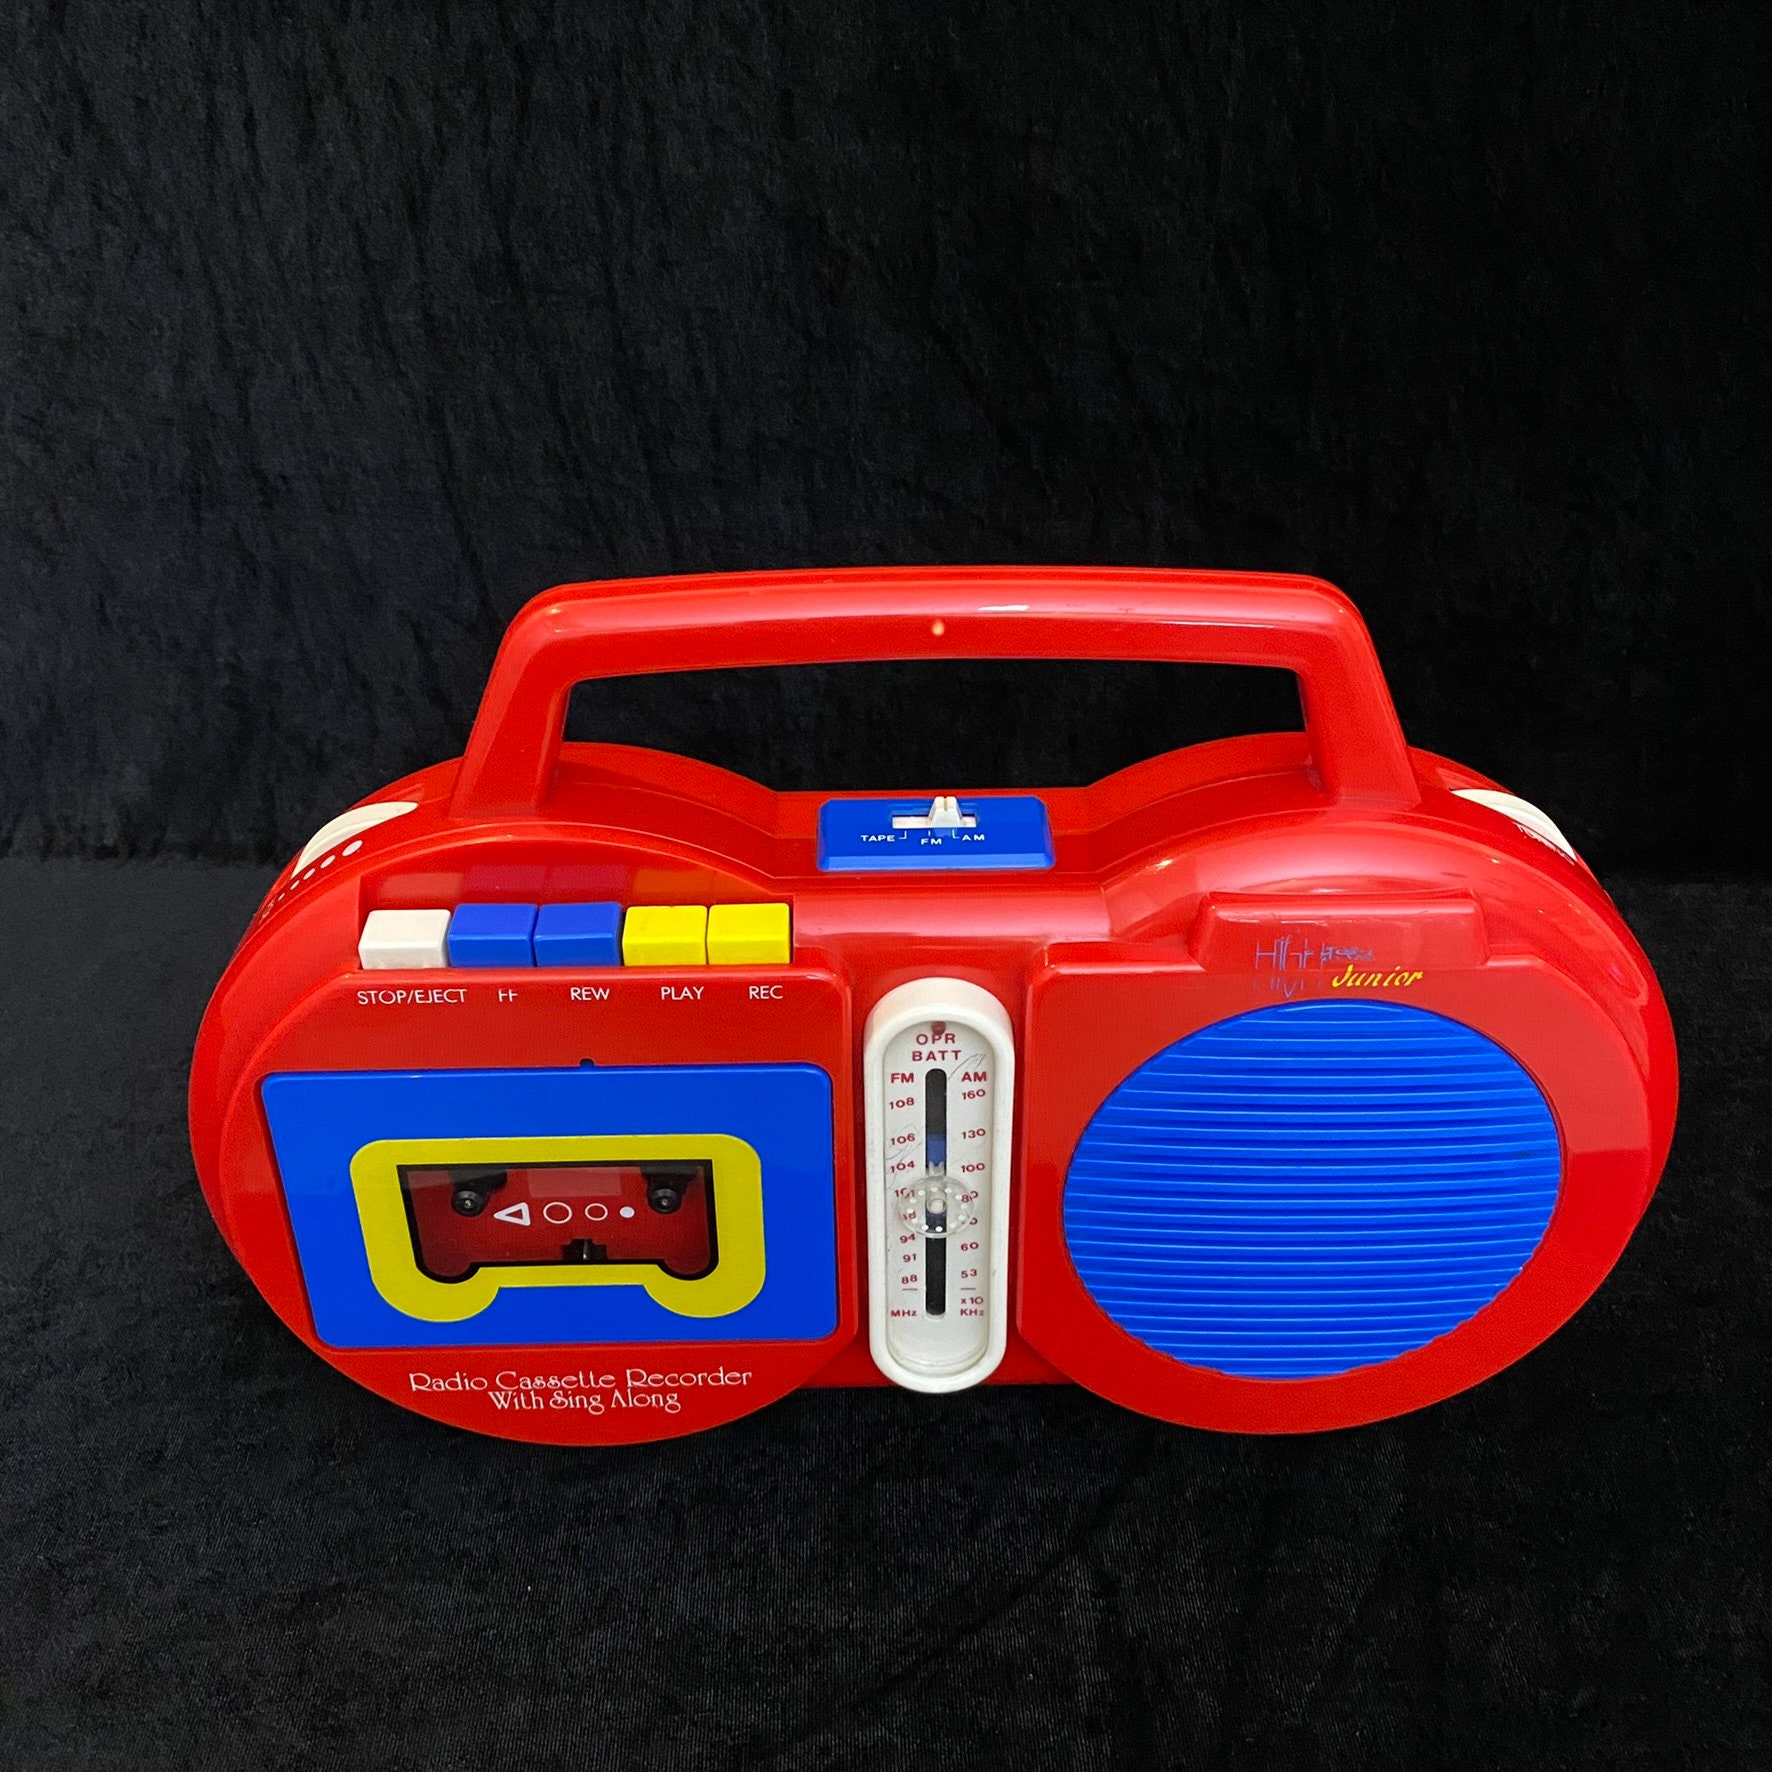 Vintage Music Kids Cassette Player, Vintage Hand Tape Recorder, Pop Art  Colors, Rare and Collectible Model, Fully Working 